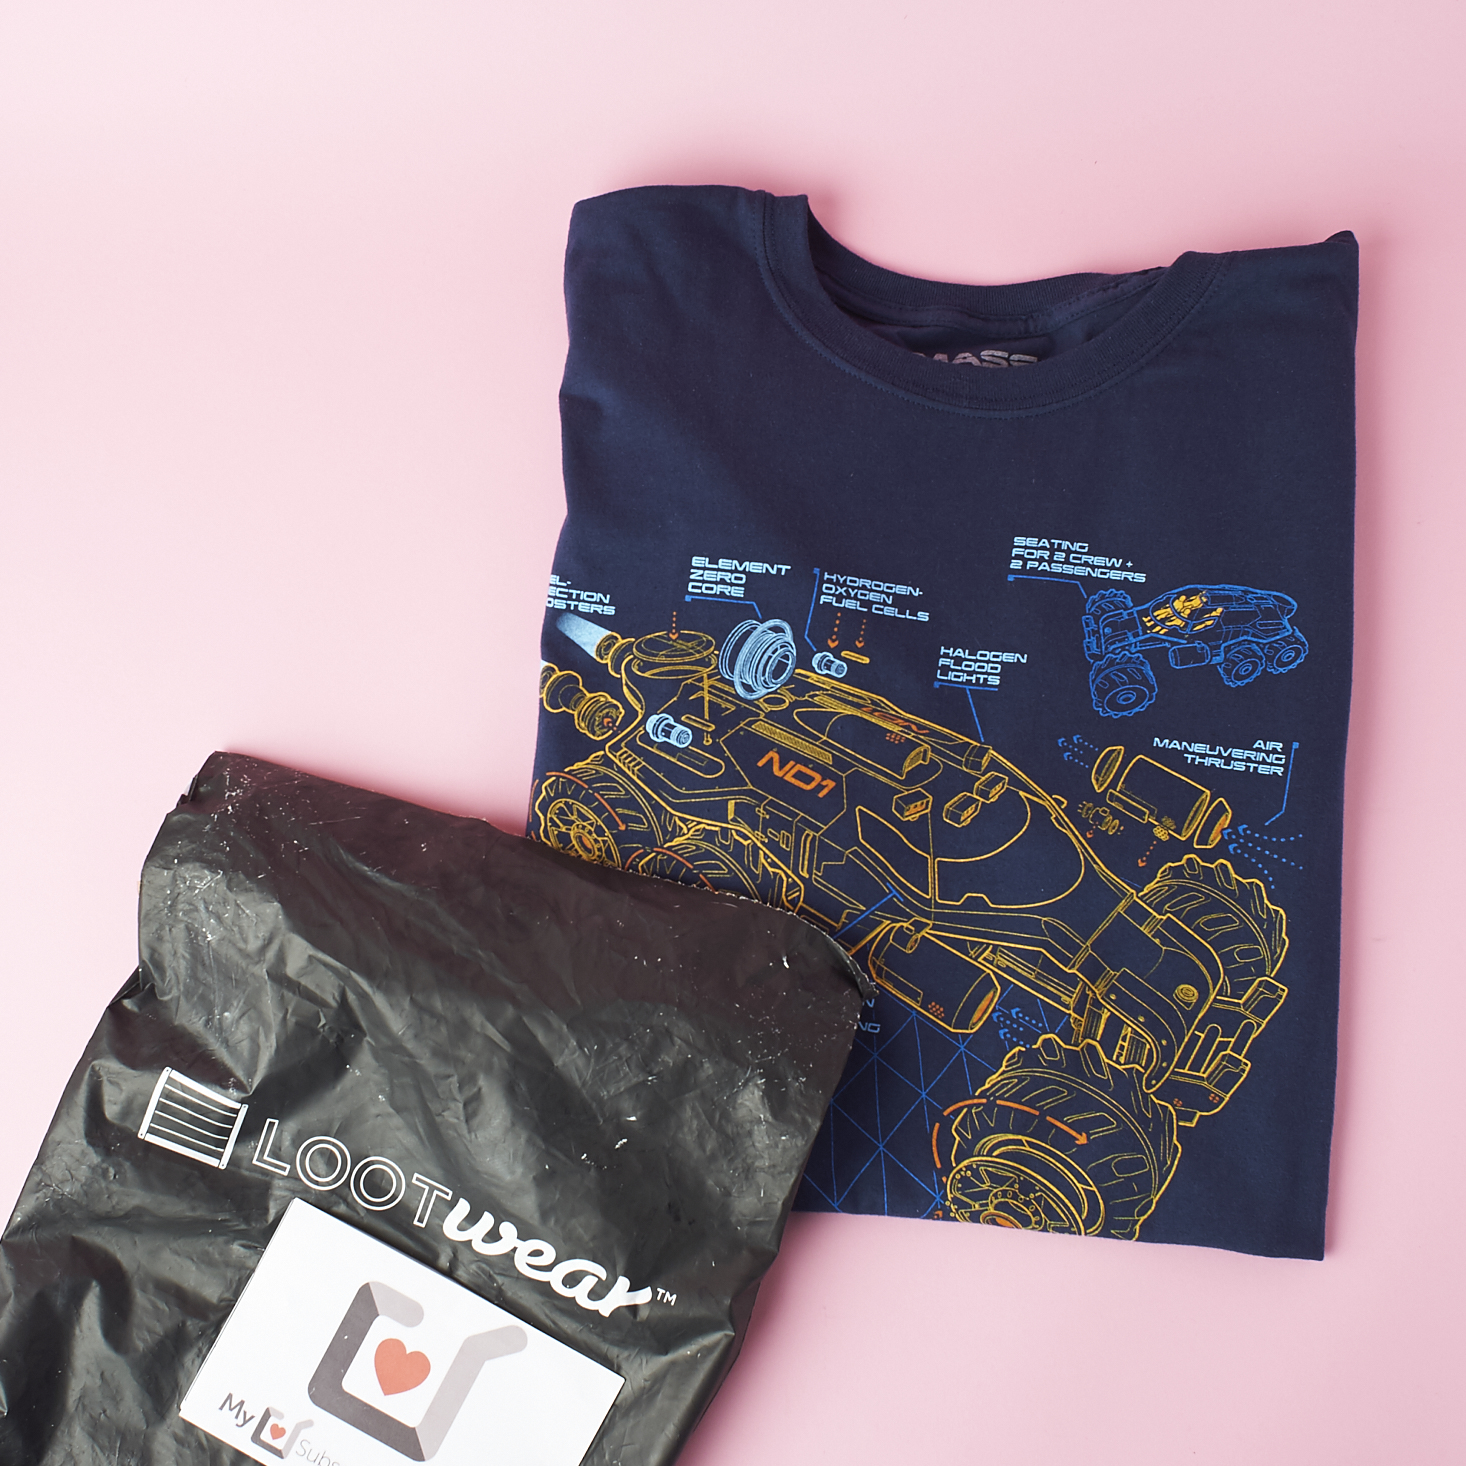 Loot Tees Subscription by Loot Crate Review + Coupon – February 2017